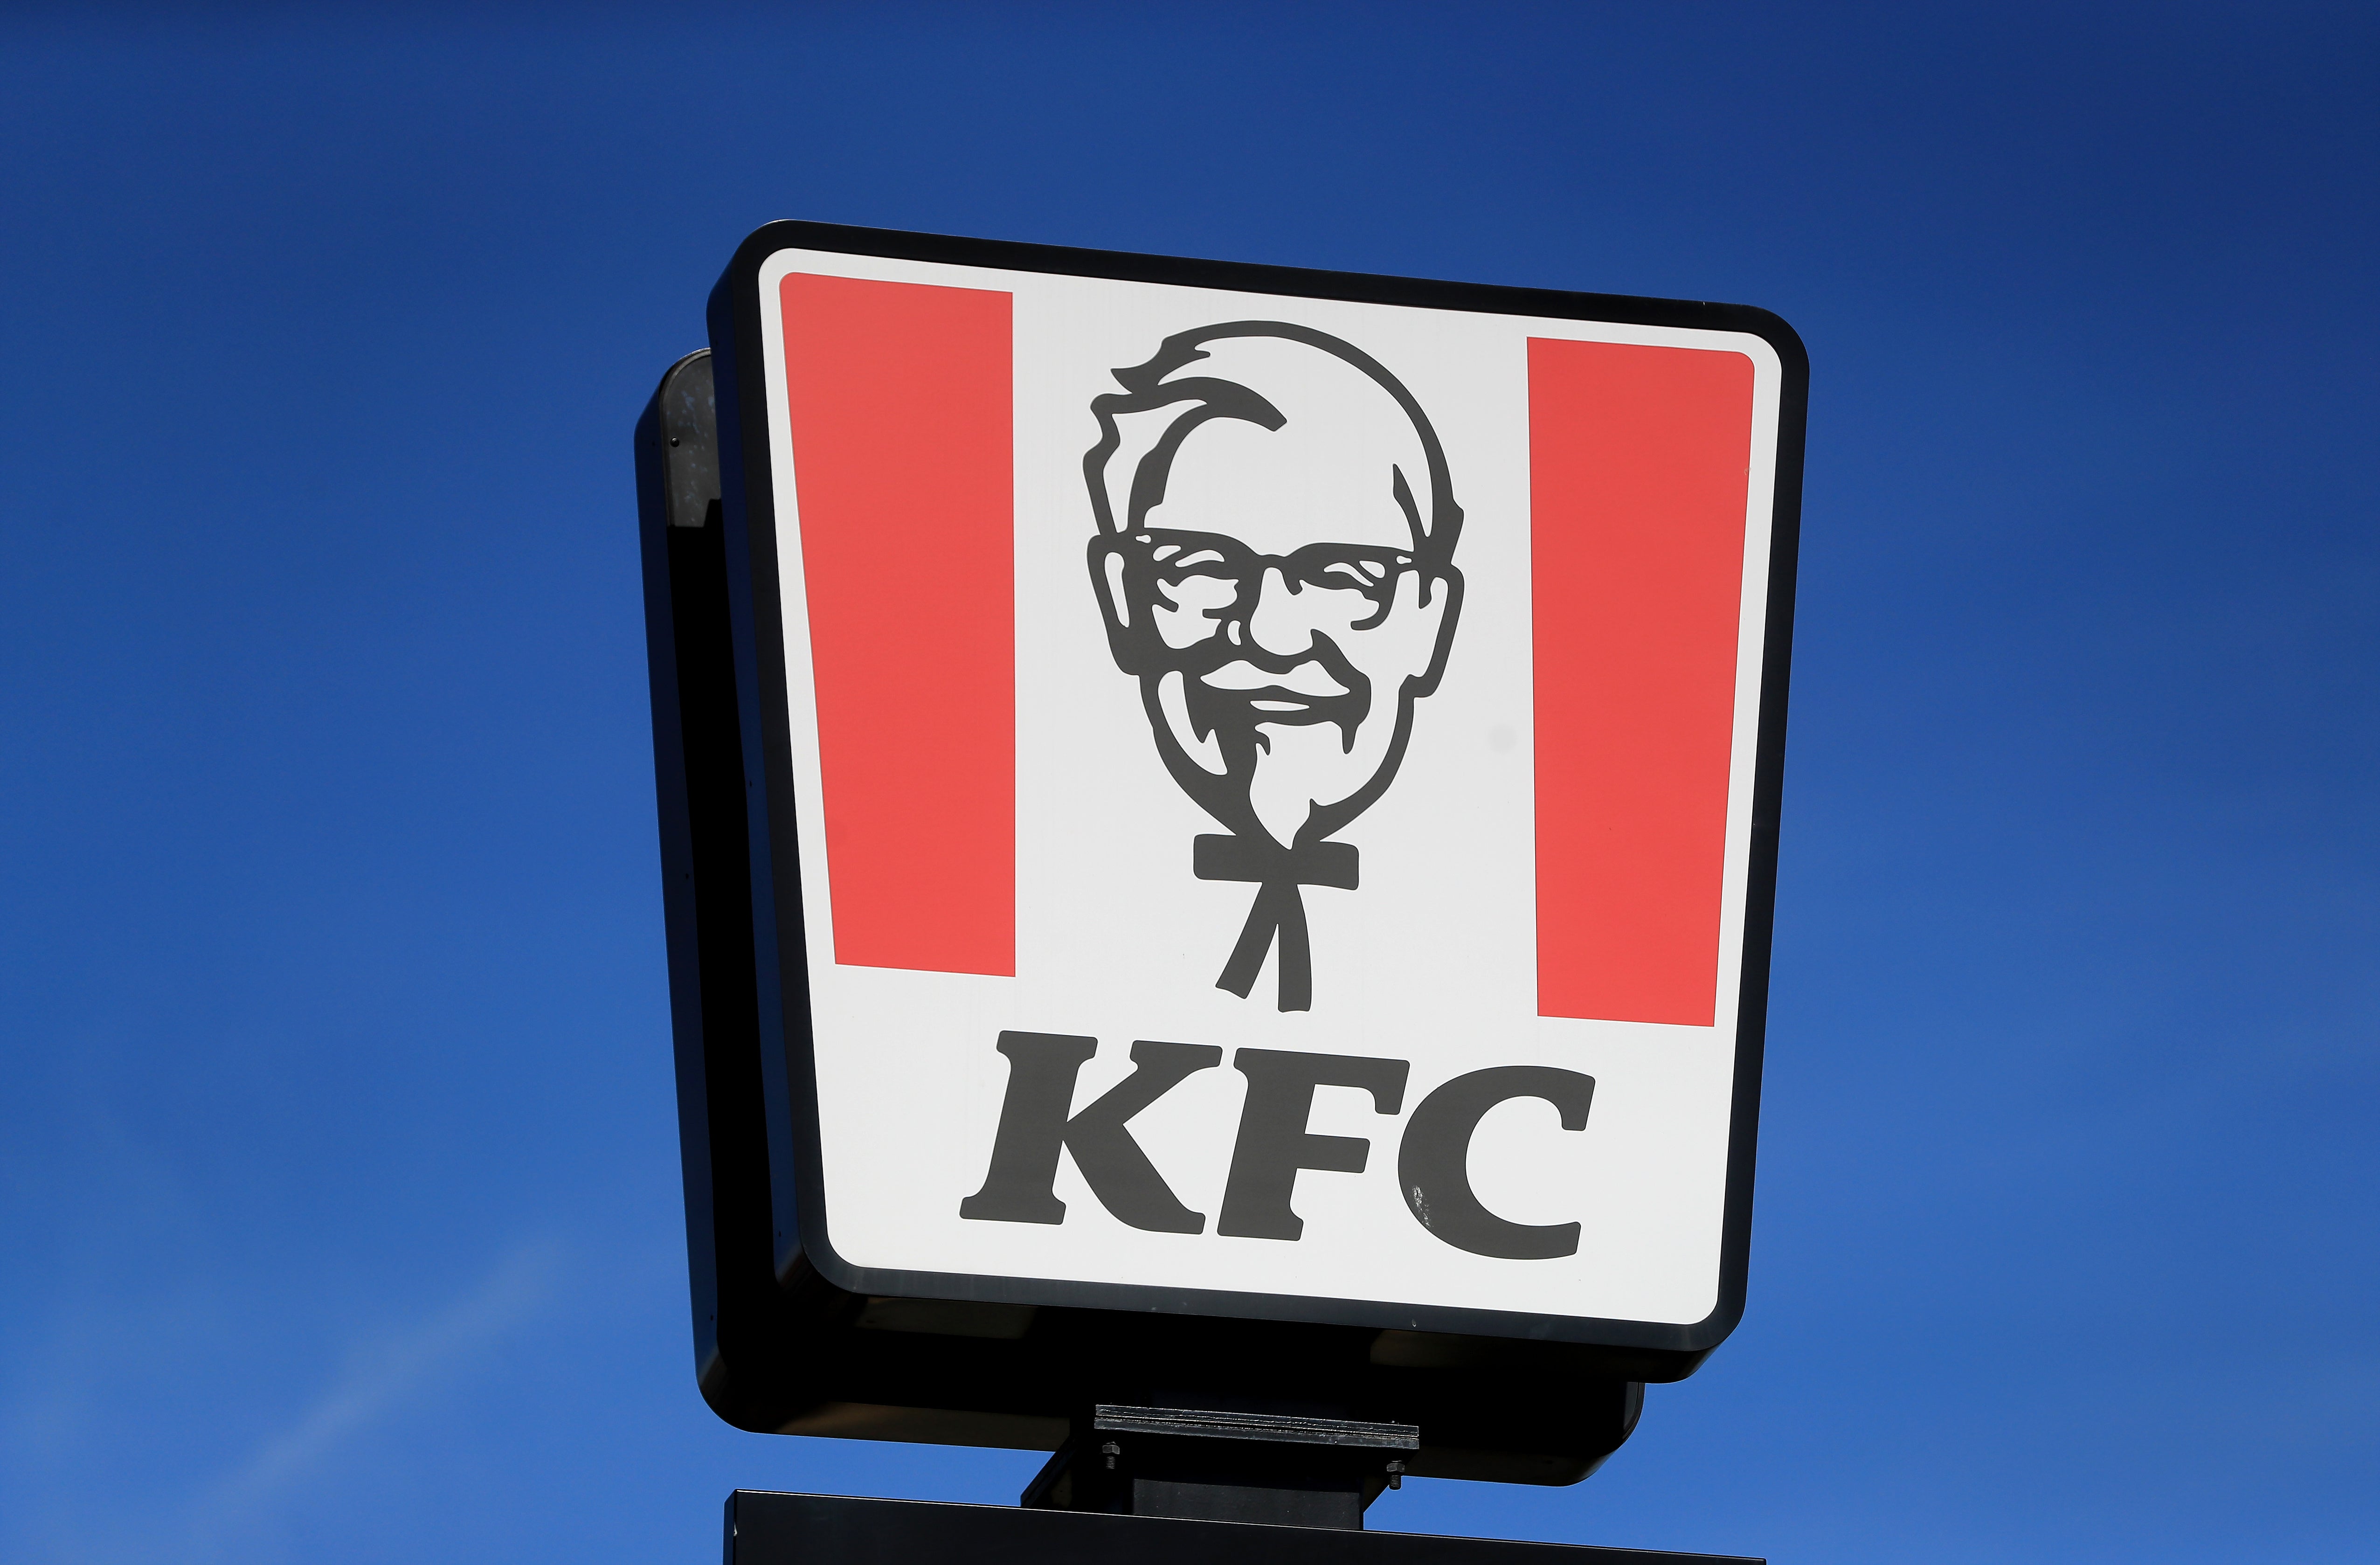 Researchers examined the social media backlash against a KFC TV advertisement showing boys ogling a woman’s breasts (Mike Egerton/PA)